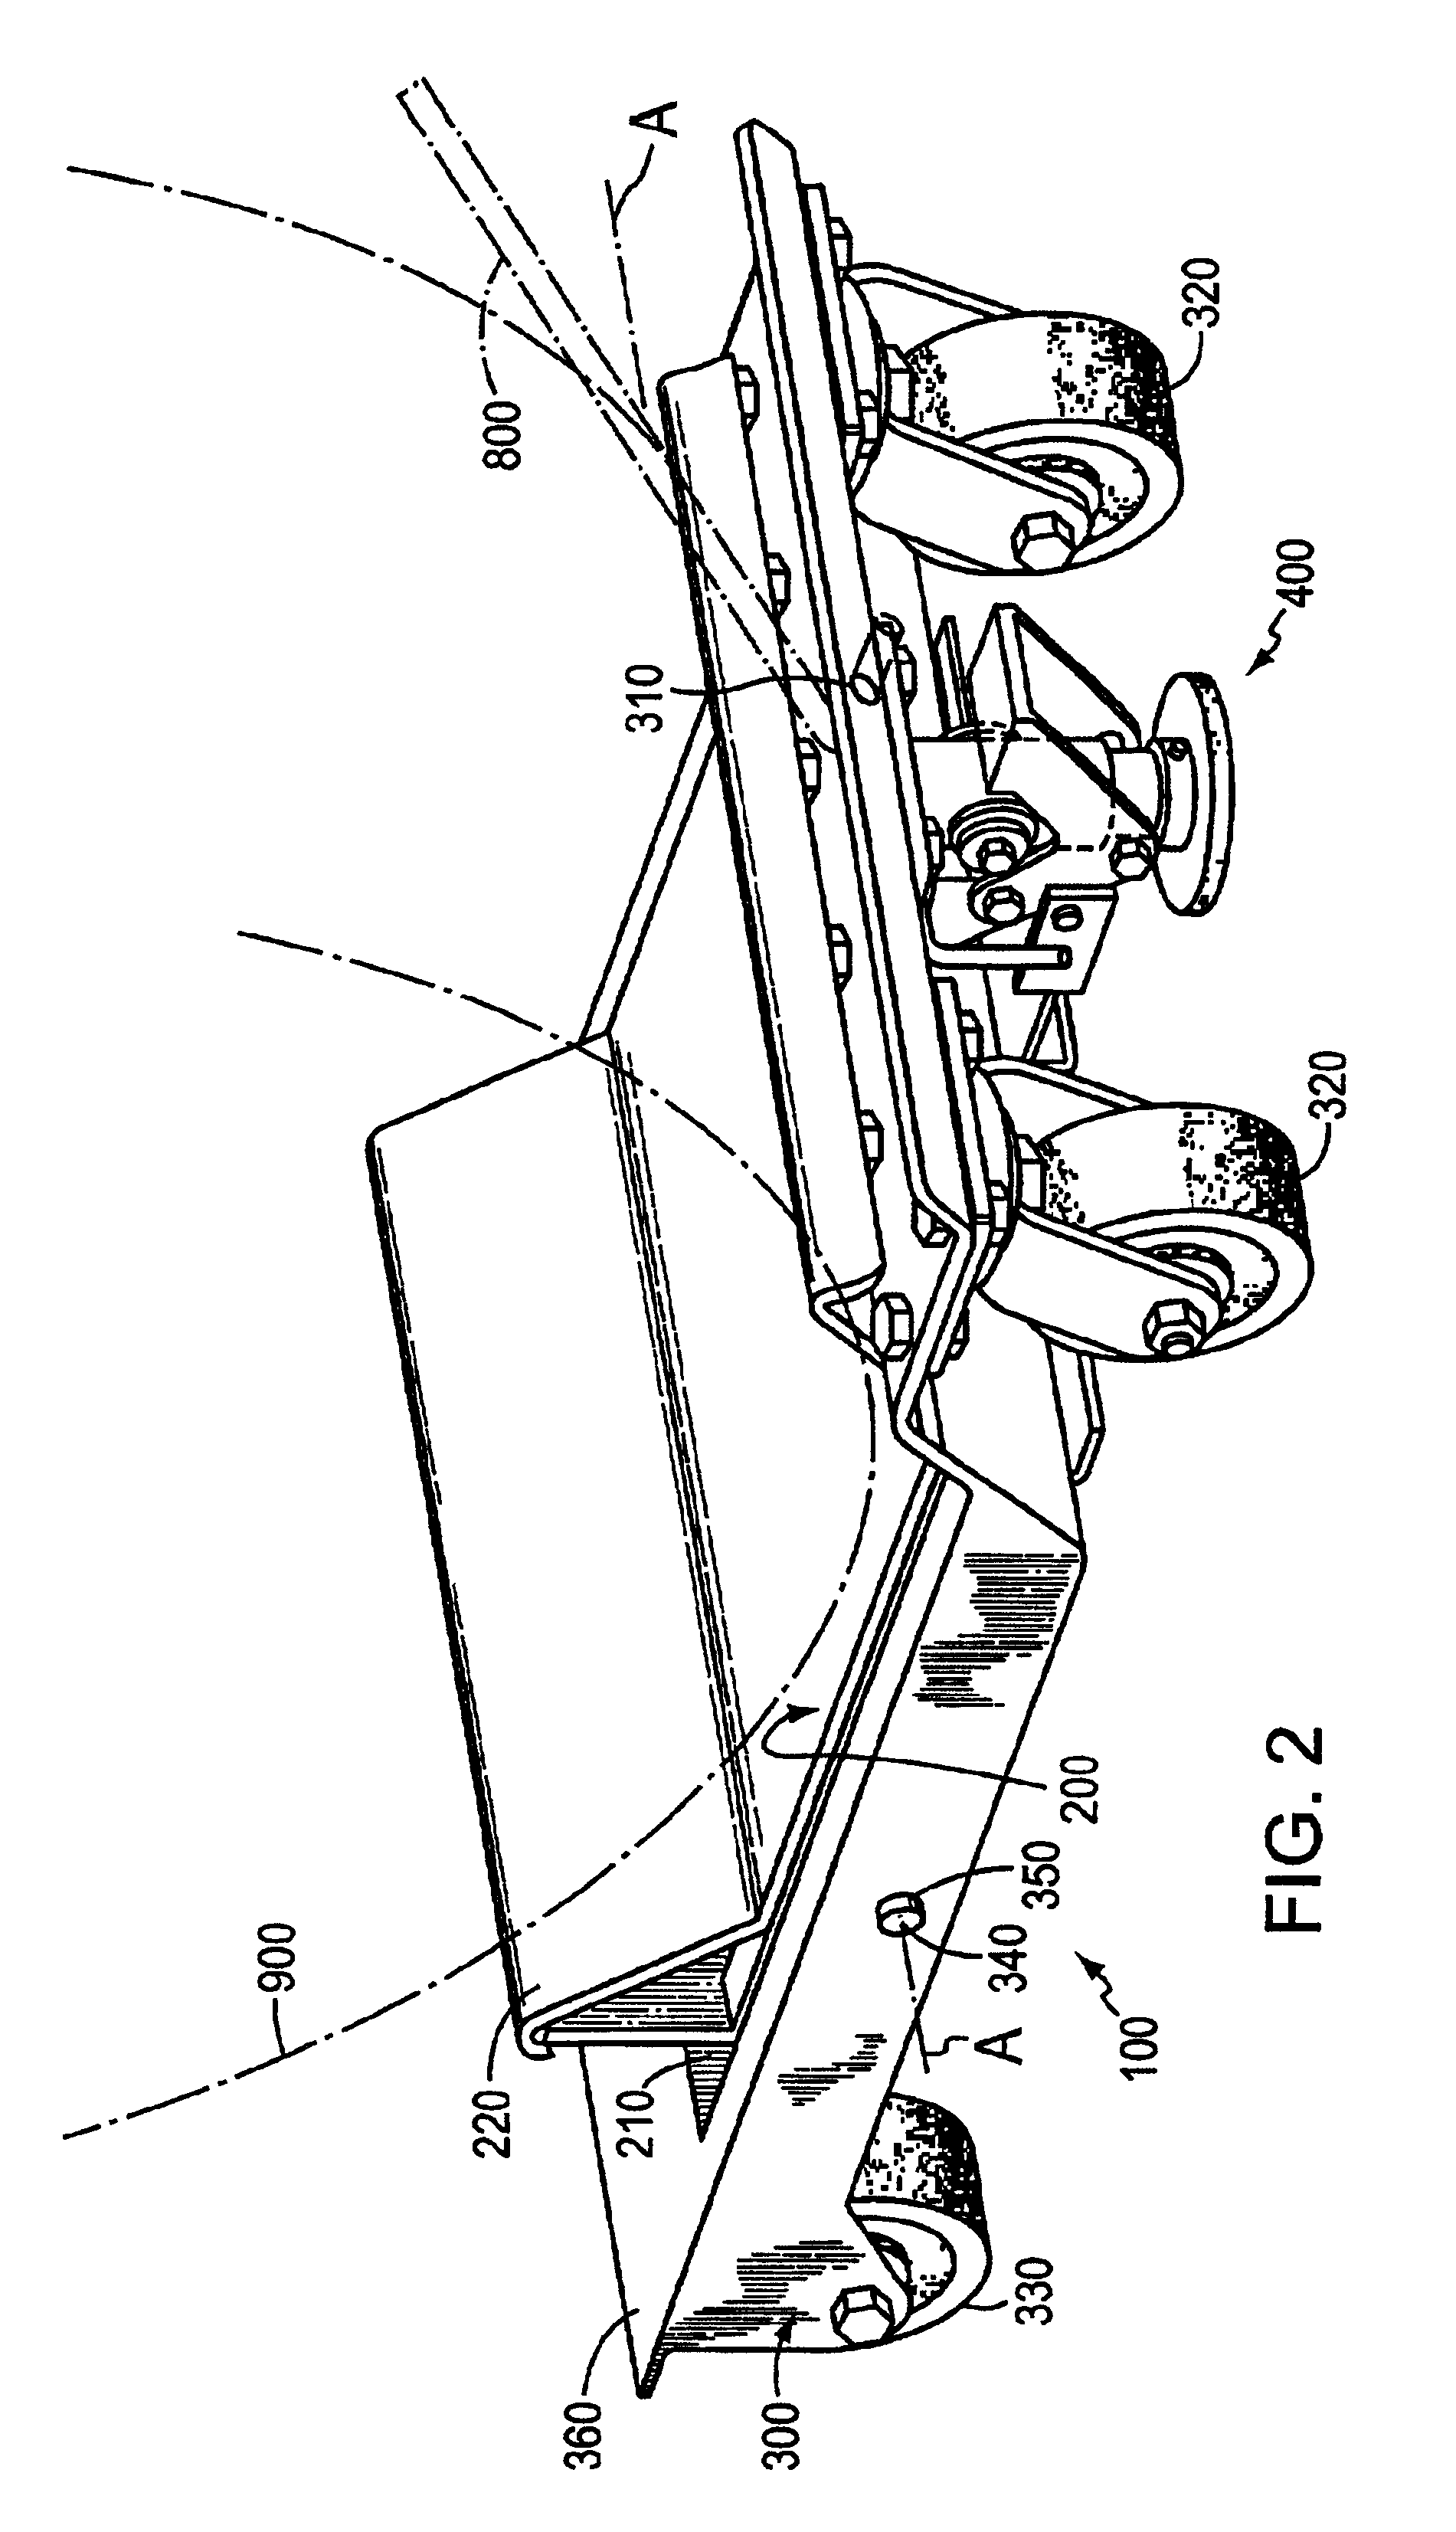 Dolly system for vehicle movement